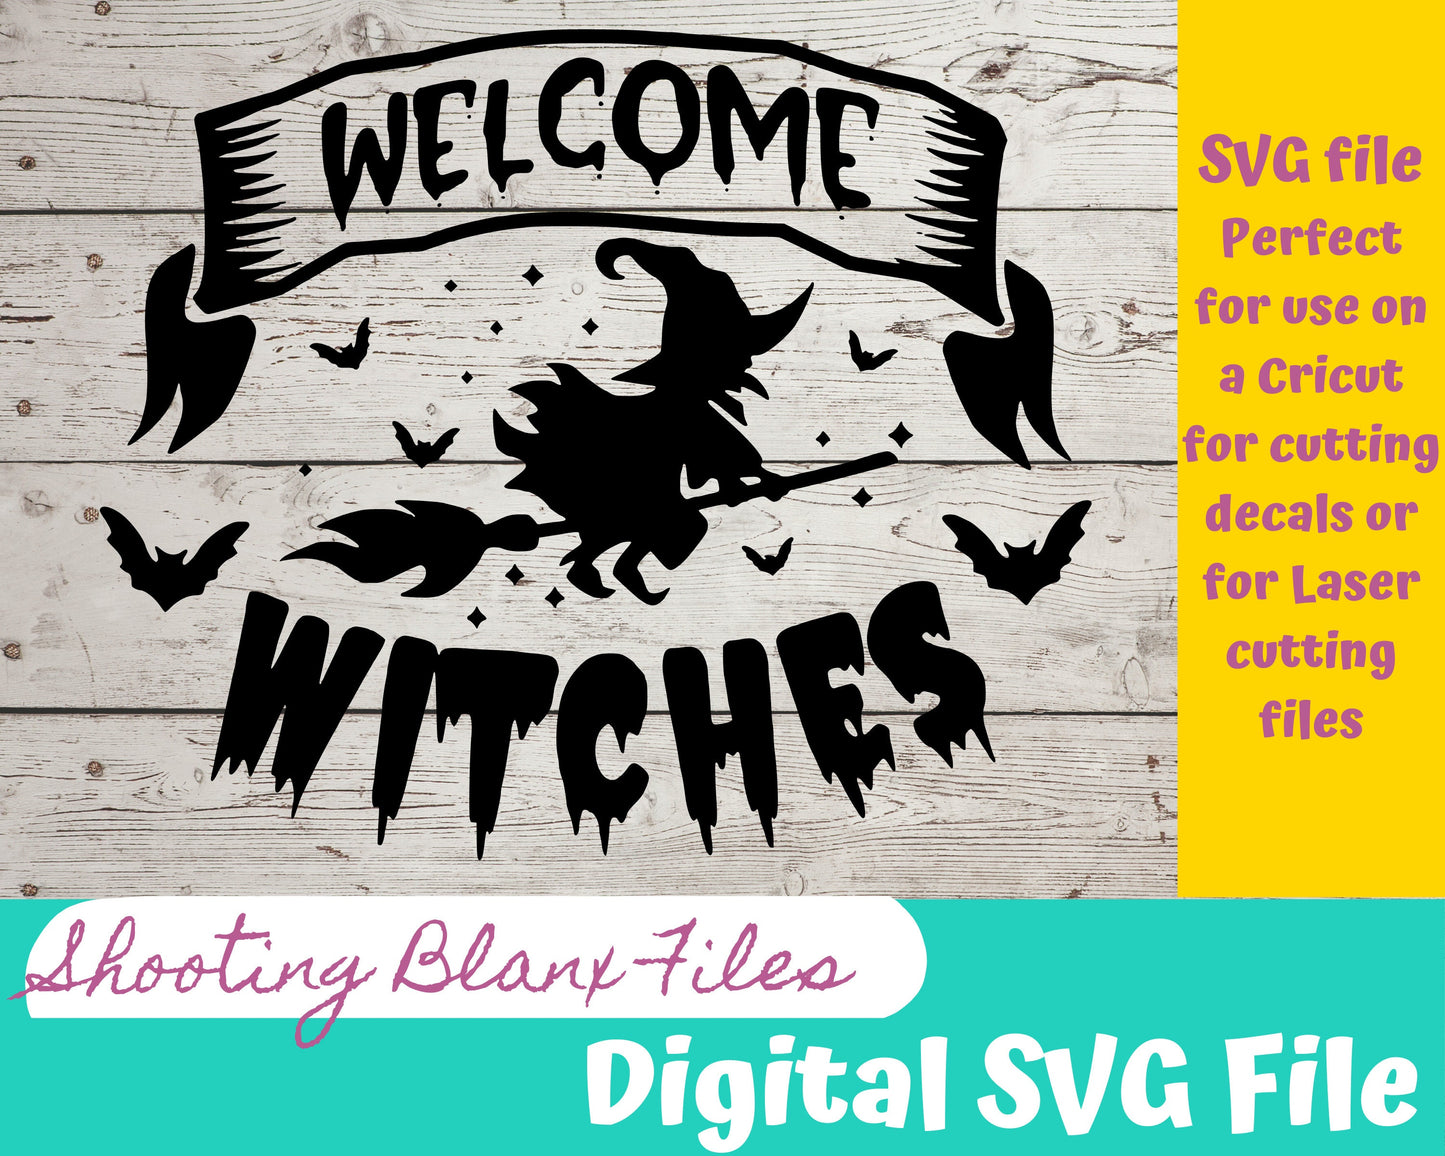 Welcome Witches SVG file for Cricut - laser engraving Glowforge, Scary, Halloween, Minimalistic, Halloween, Horror, phrase, saying